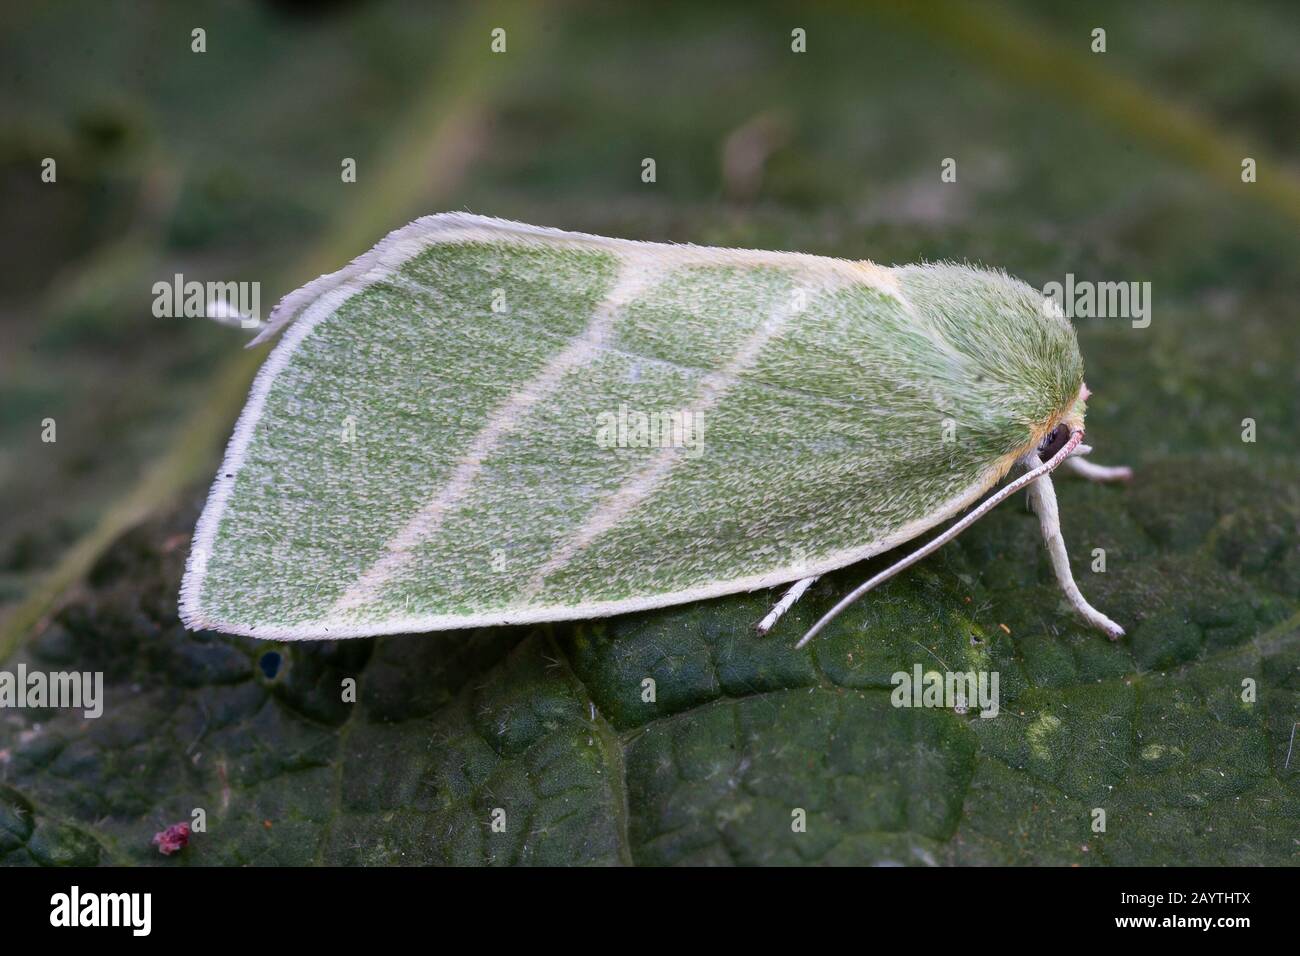 Few silver lines, Bena bicolorrana, nocturnal butterfly of the Nolidae family, perched on a green leaf. Spain Stock Photo